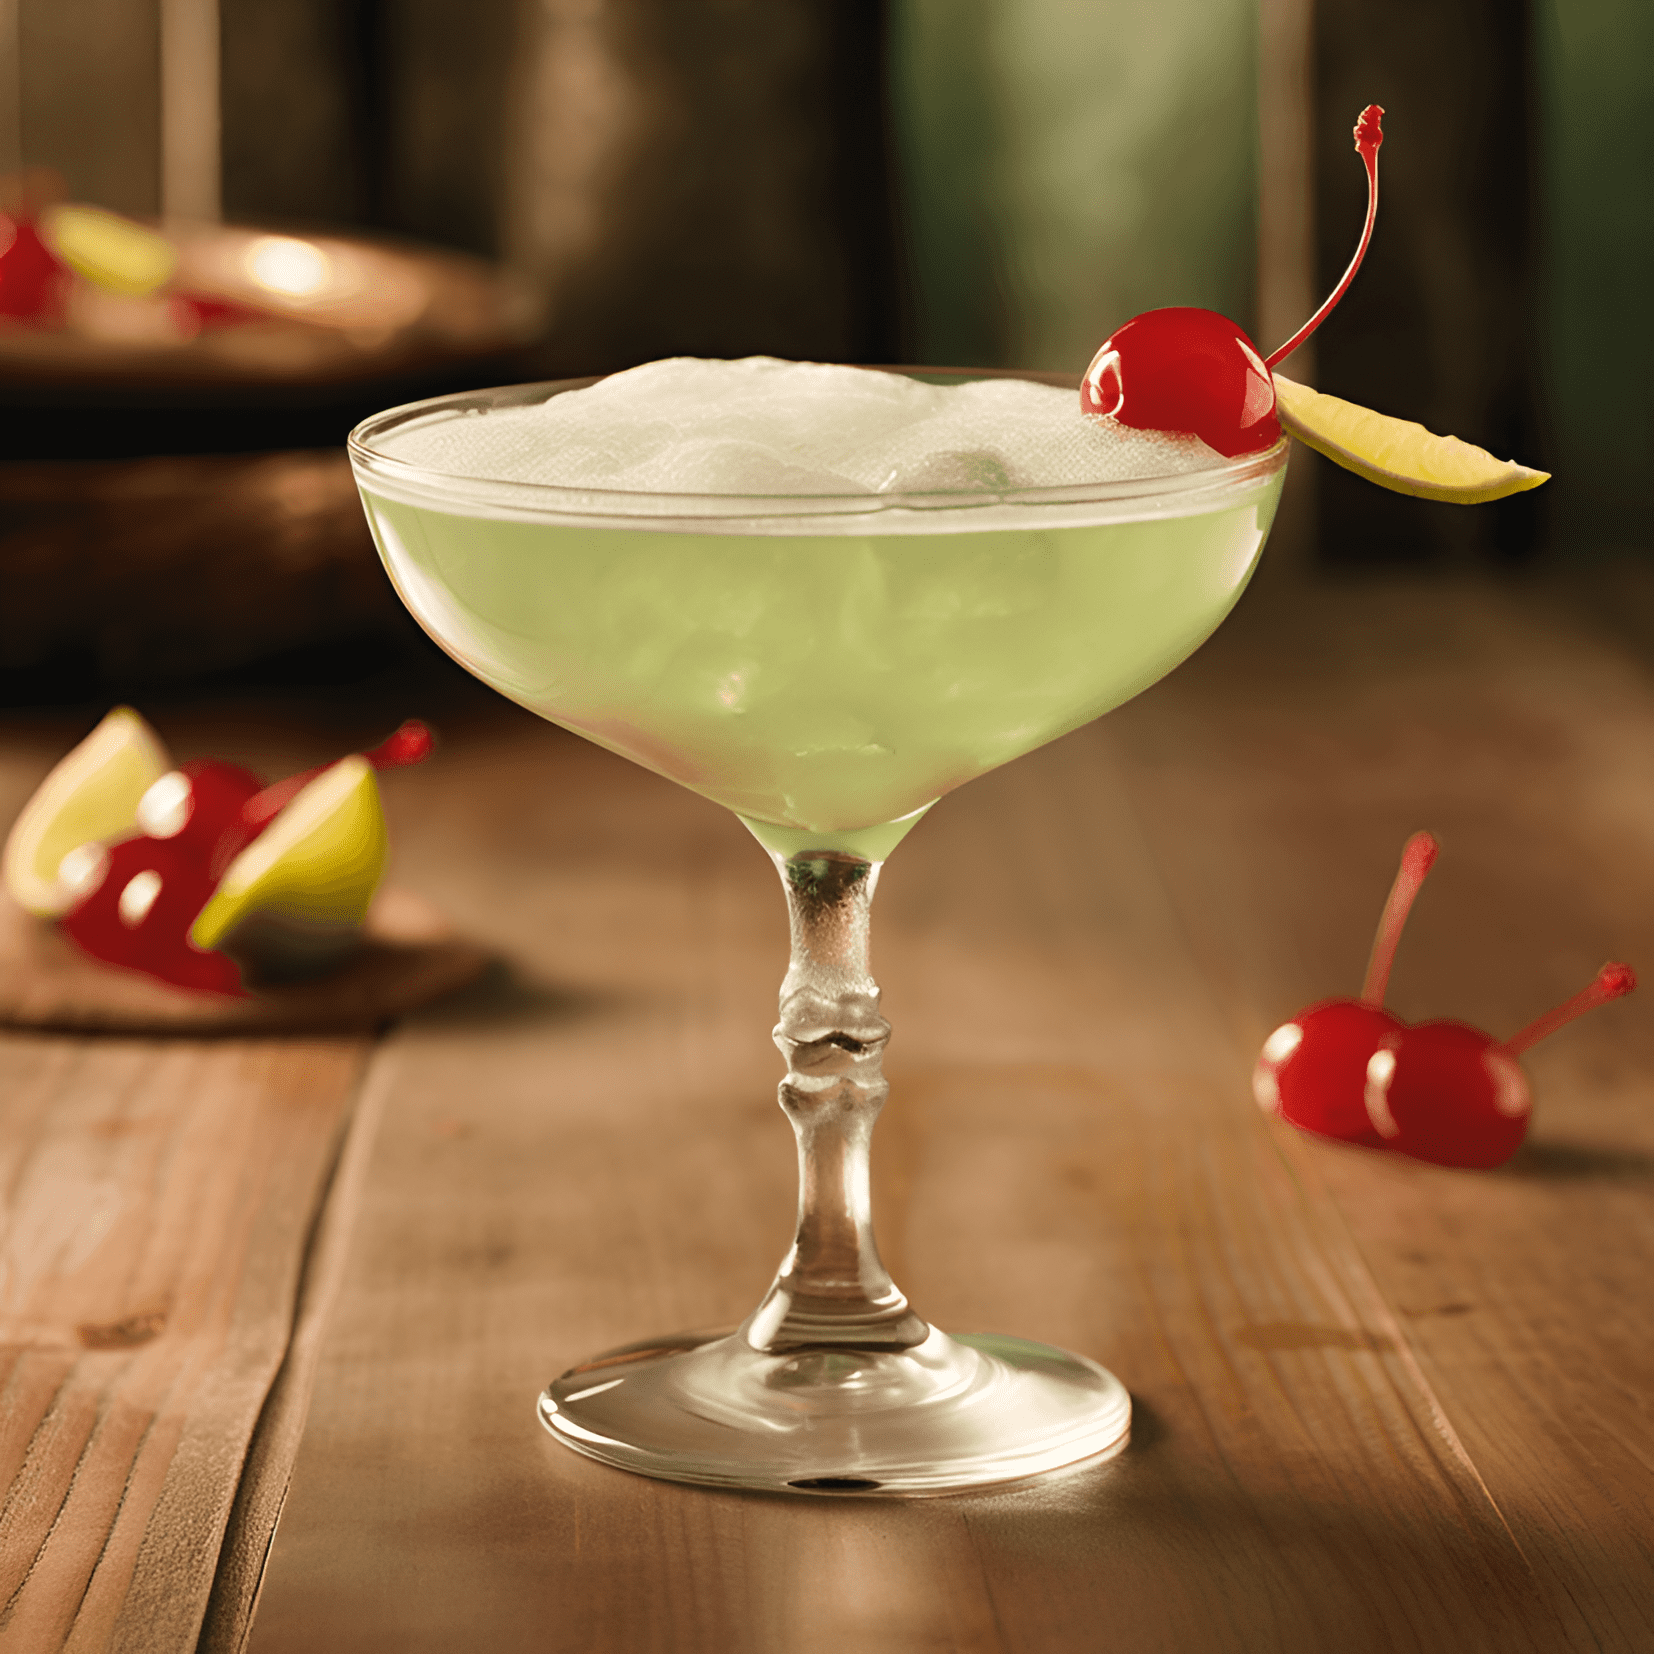 La Floridita Cocktail Recipe - La Floridita has a refreshing, tangy, and slightly sweet taste. The combination of rum, lime juice, and maraschino liqueur creates a well-balanced flavor profile that is both strong and light at the same time.